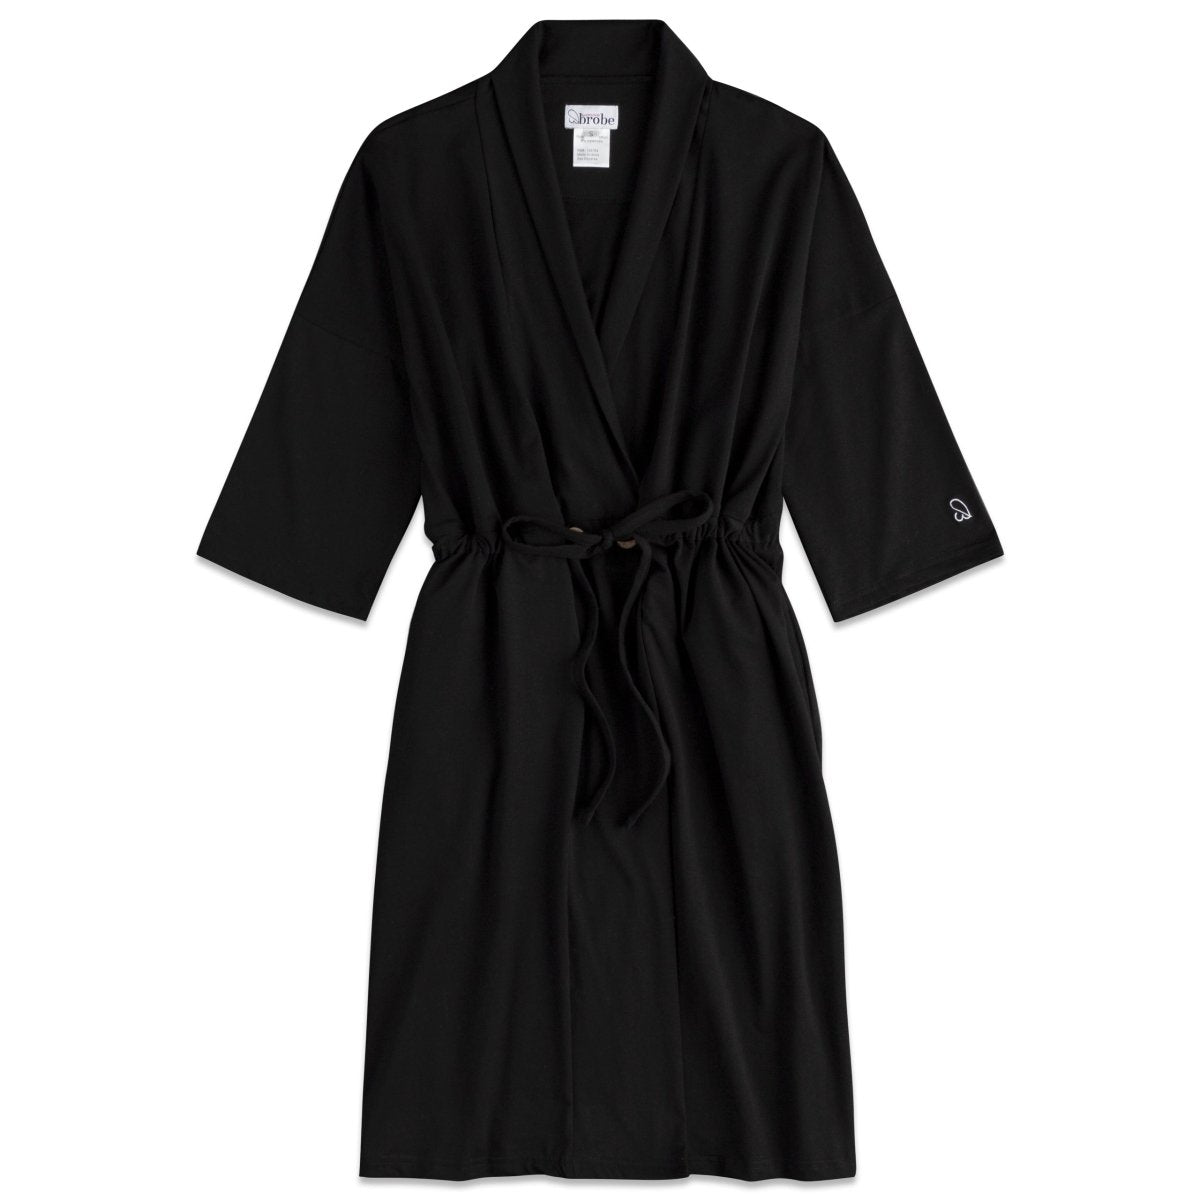 BrobeRecovery Robe with Drain Management PLUS Pocketed BraBravo Bra Boutique